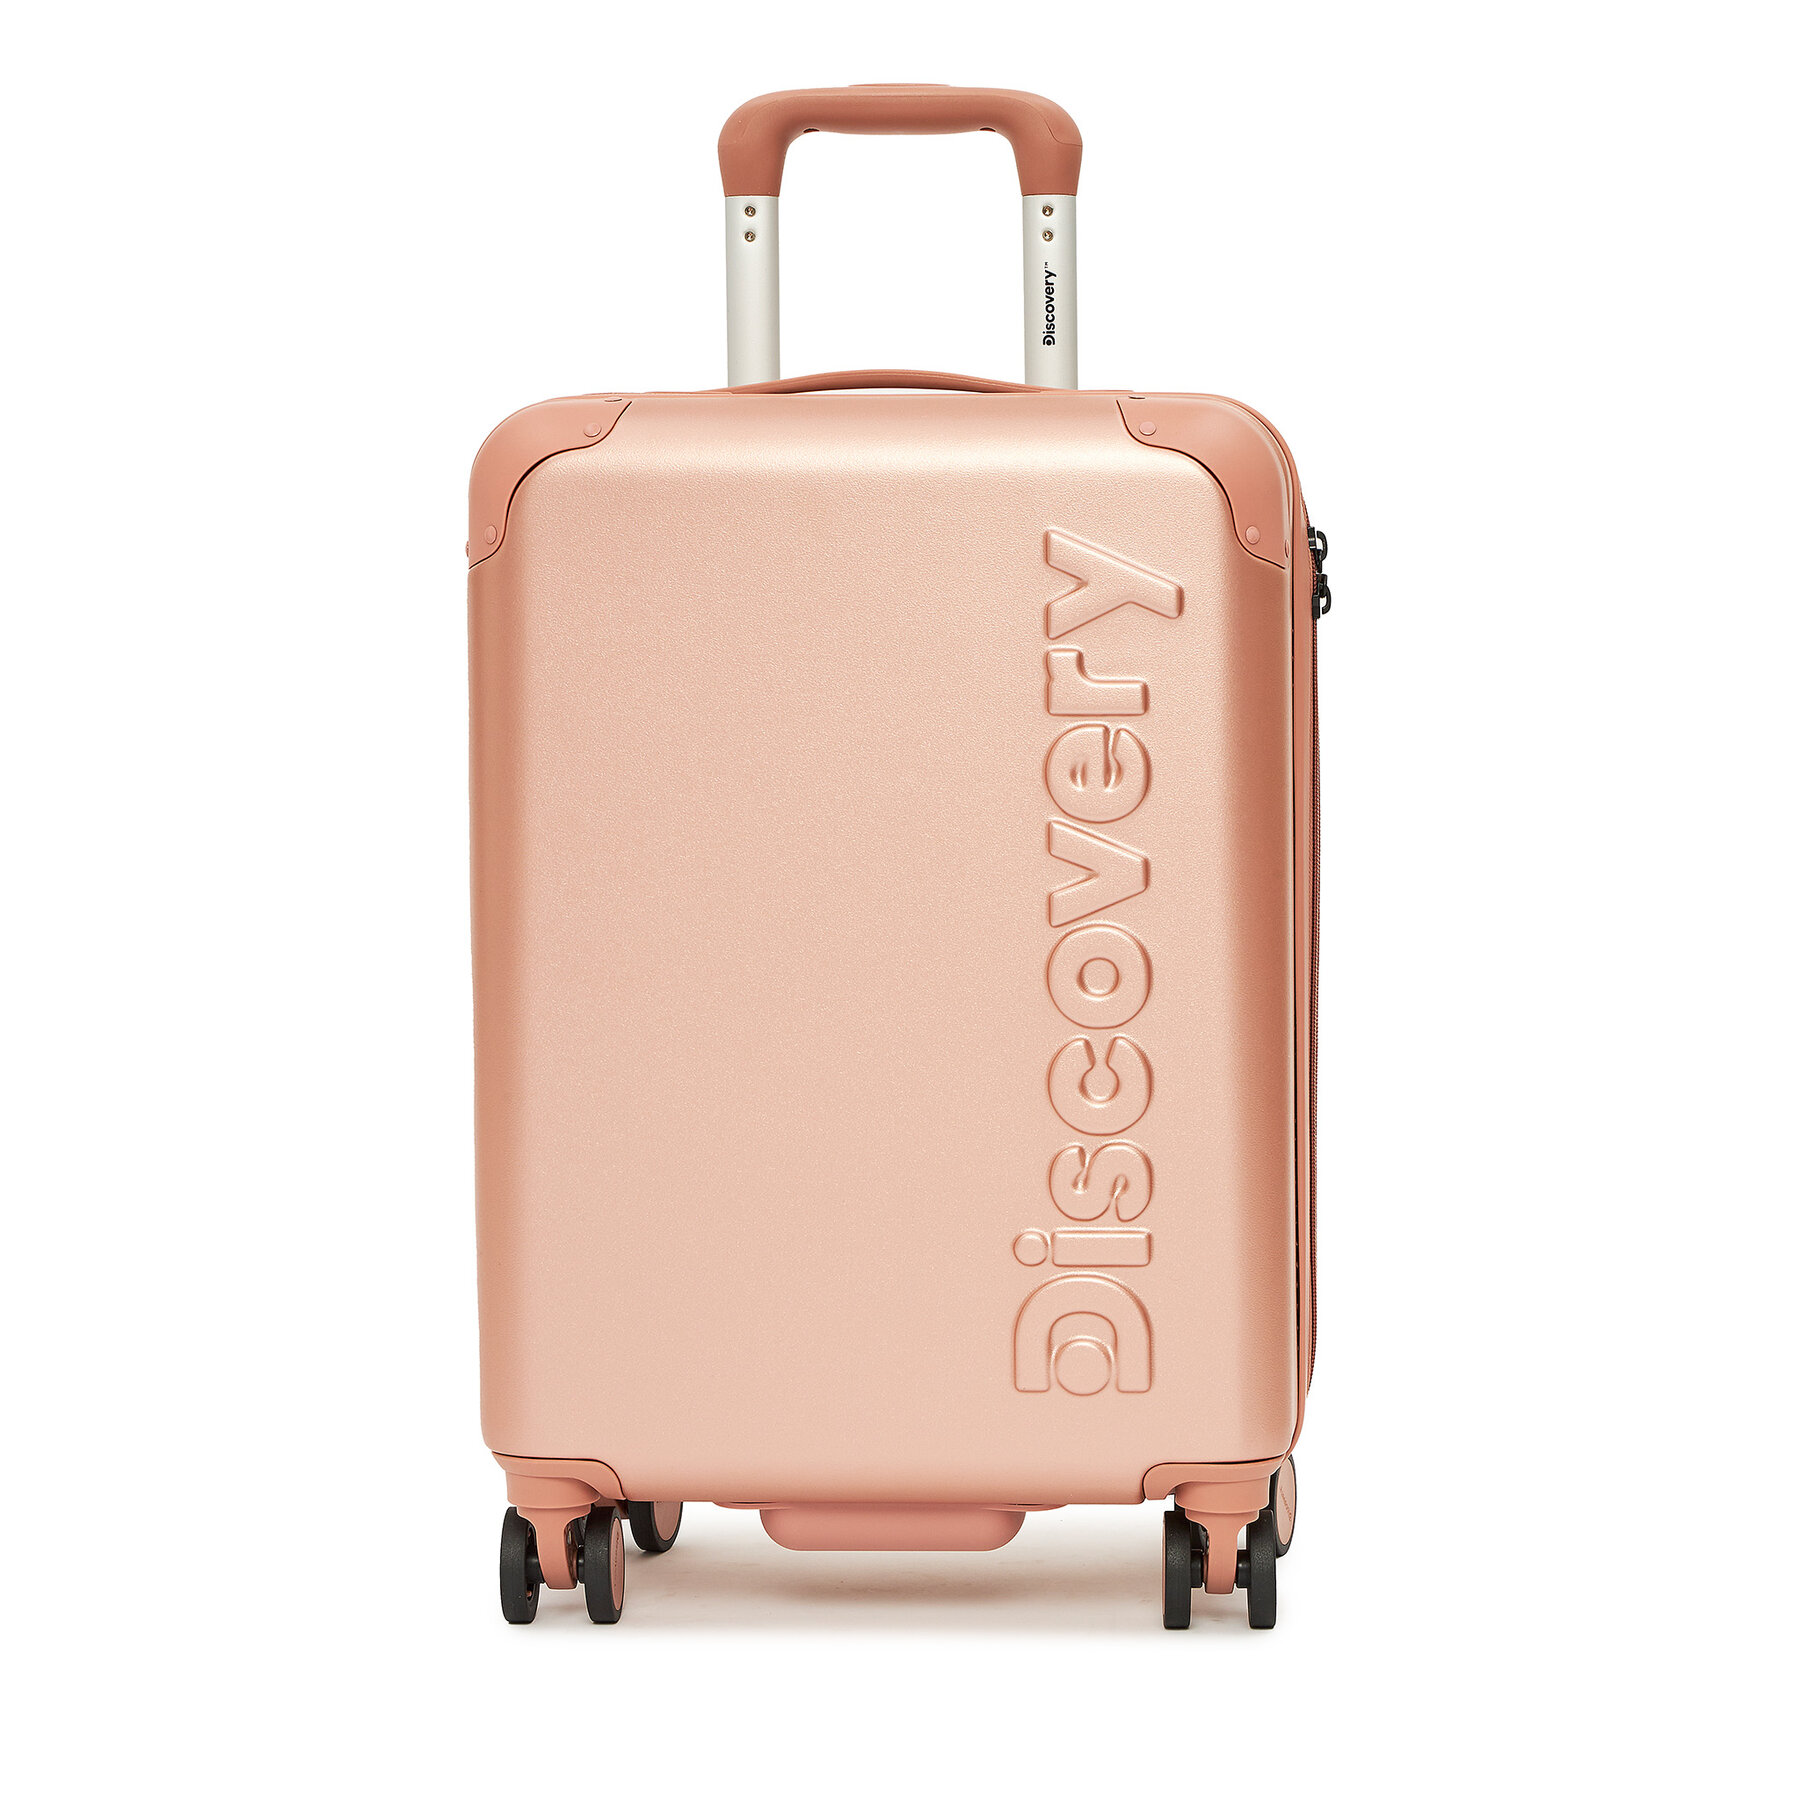 Kabinenkoffer Discovery Focus D005HA.49.14 Rosa von Discovery